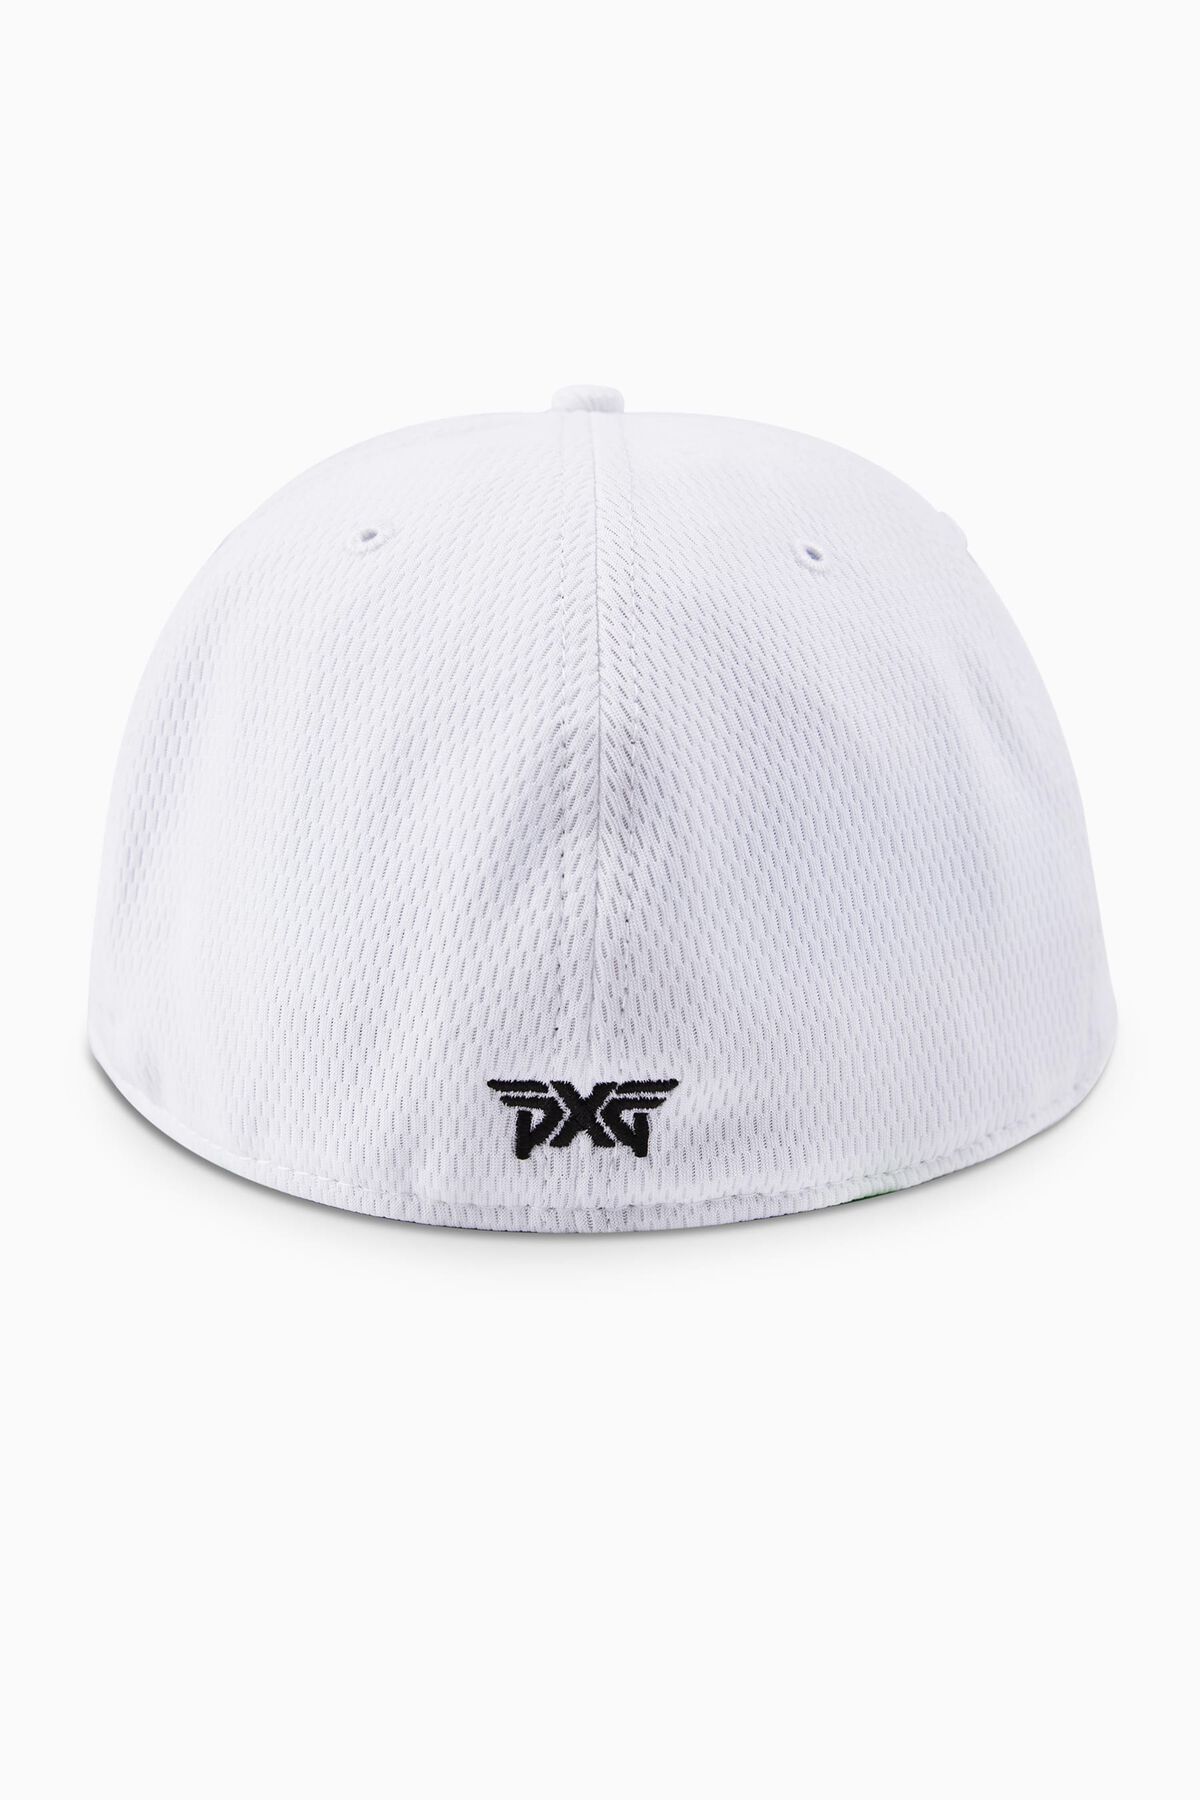 59fifty fitted hat